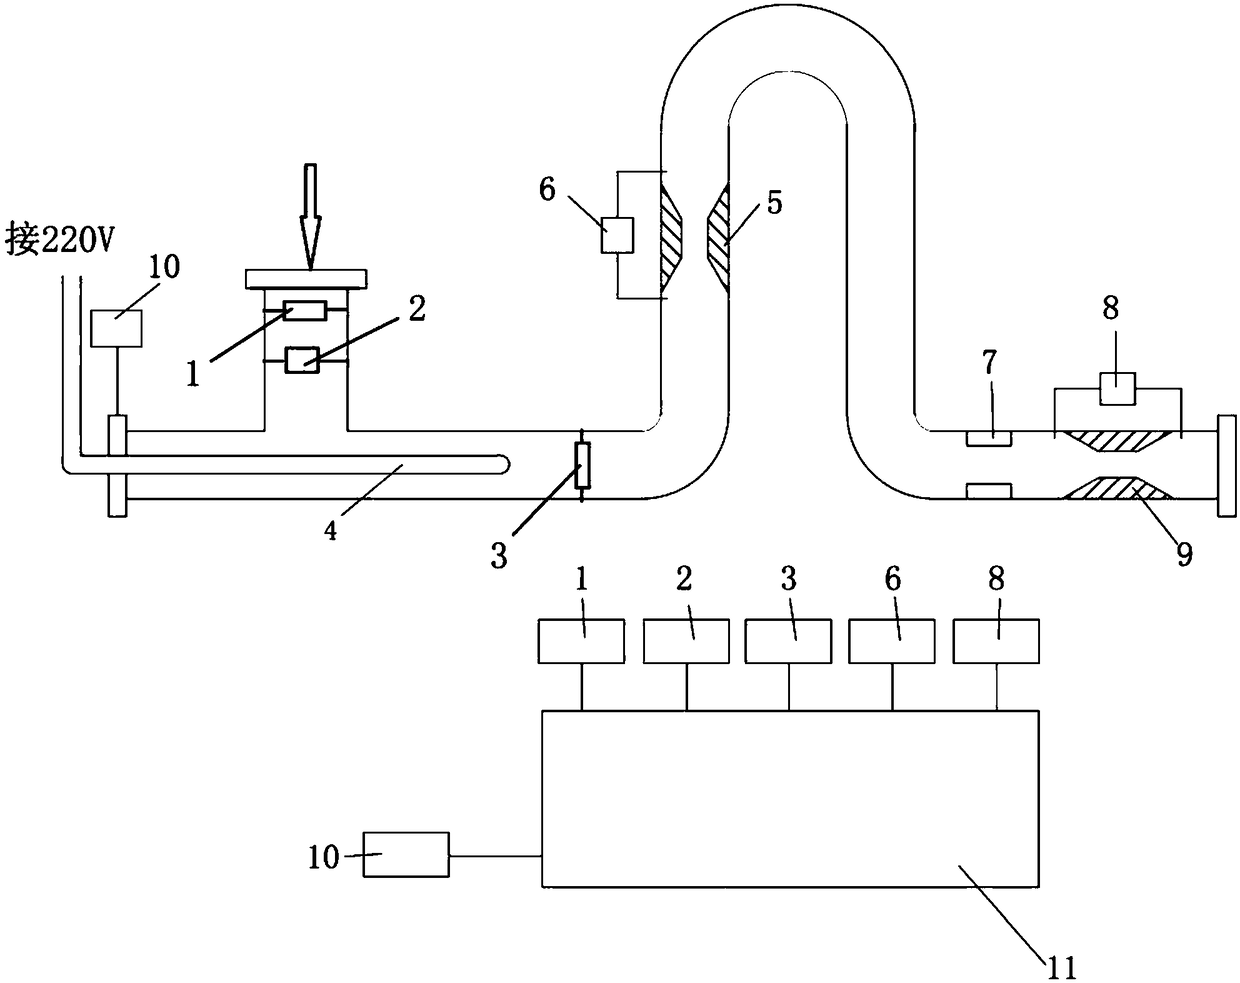 Online measurement method and device for flow of three phases including crude oil, natural gas and water